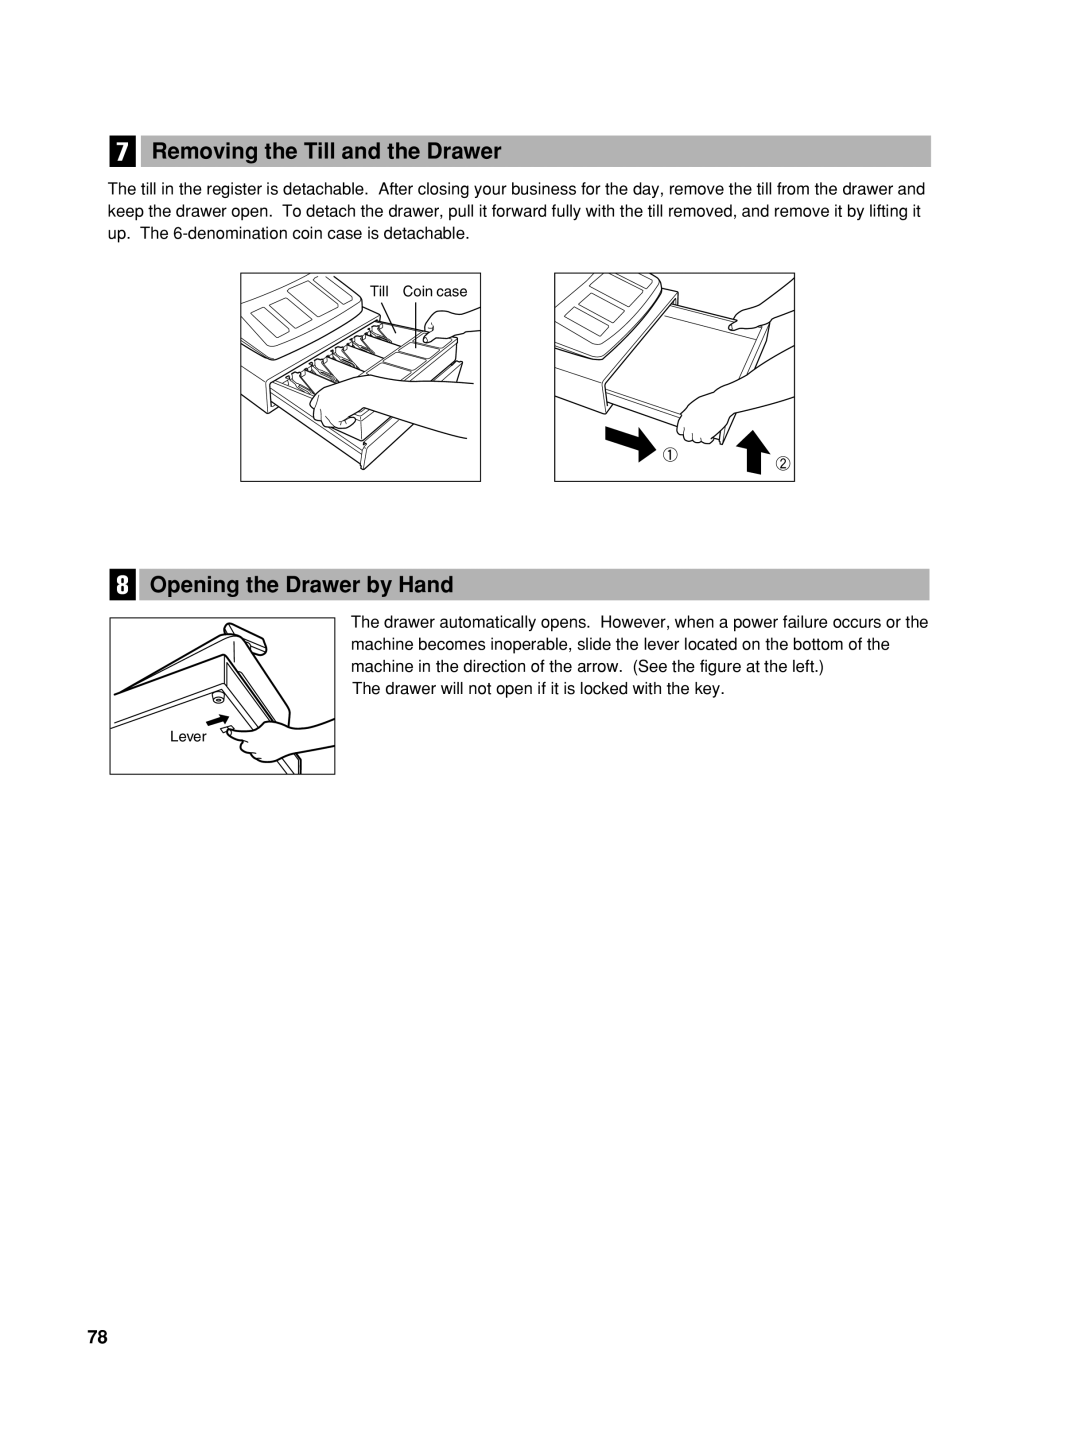 Sharp XE-A42S instruction manual Removing the Till and the Drawer, Opening the Drawer by Hand 